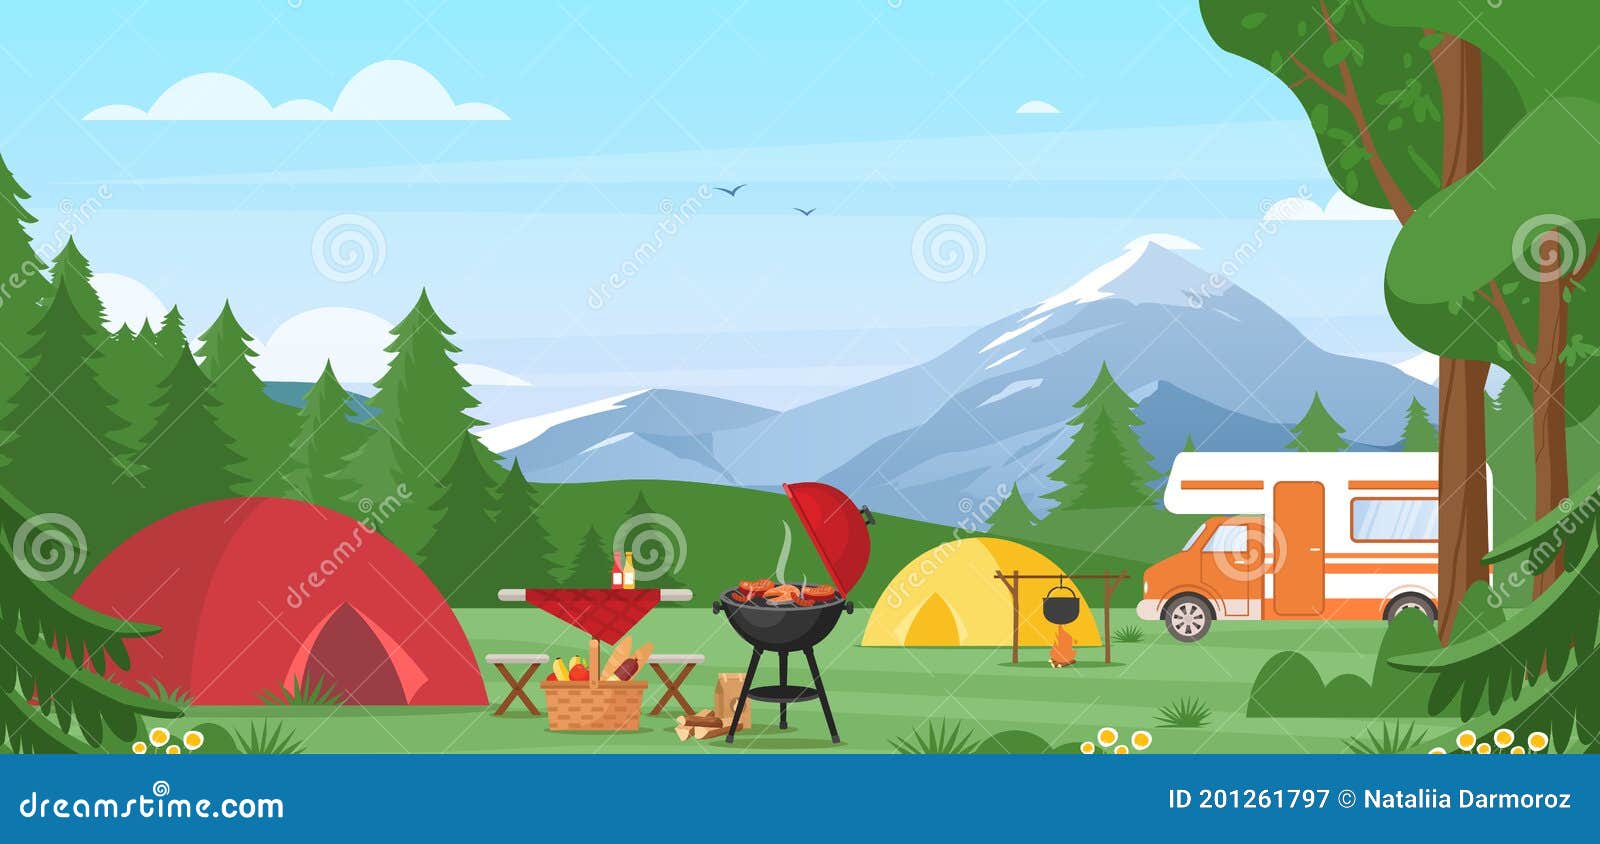 Summer Camping Vector Illustration. Outdoor Nature Adventure, Active ...